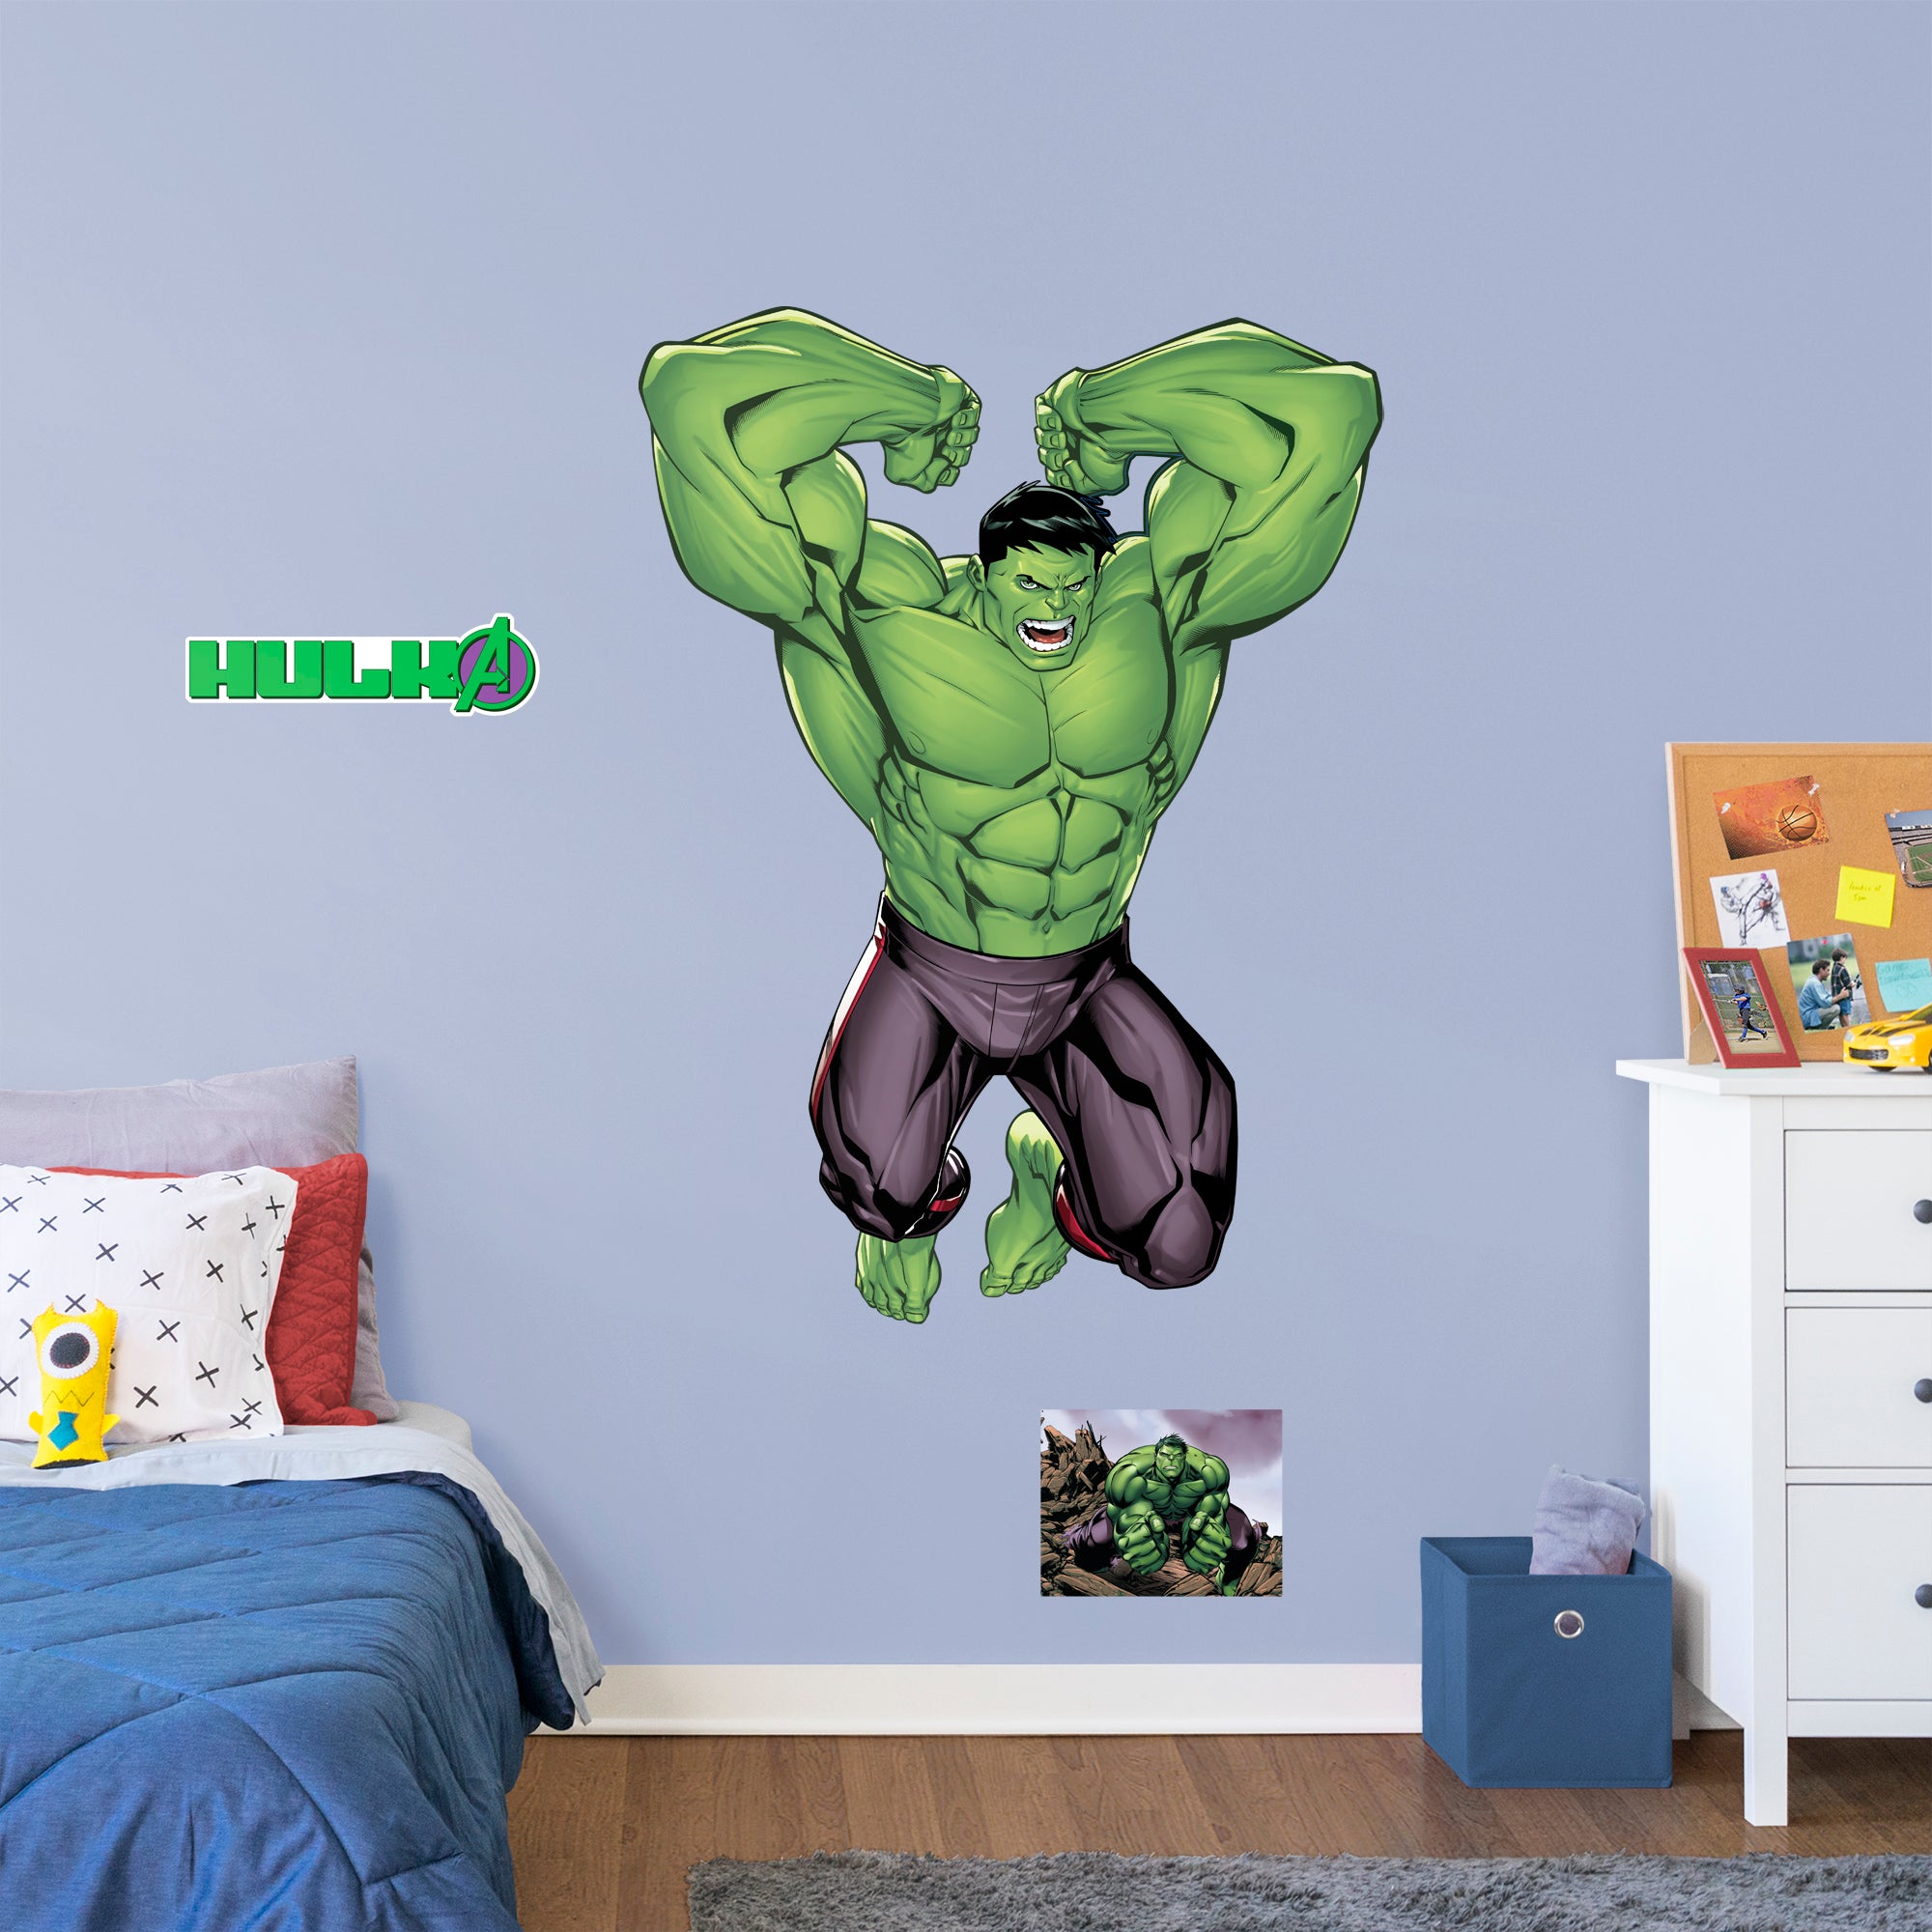 Hulk: Avengers Core - Officially Licensed Removable Wall Decal Giant Character + 2 Decals (37"W x 51"H) by Fathead | Vinyl